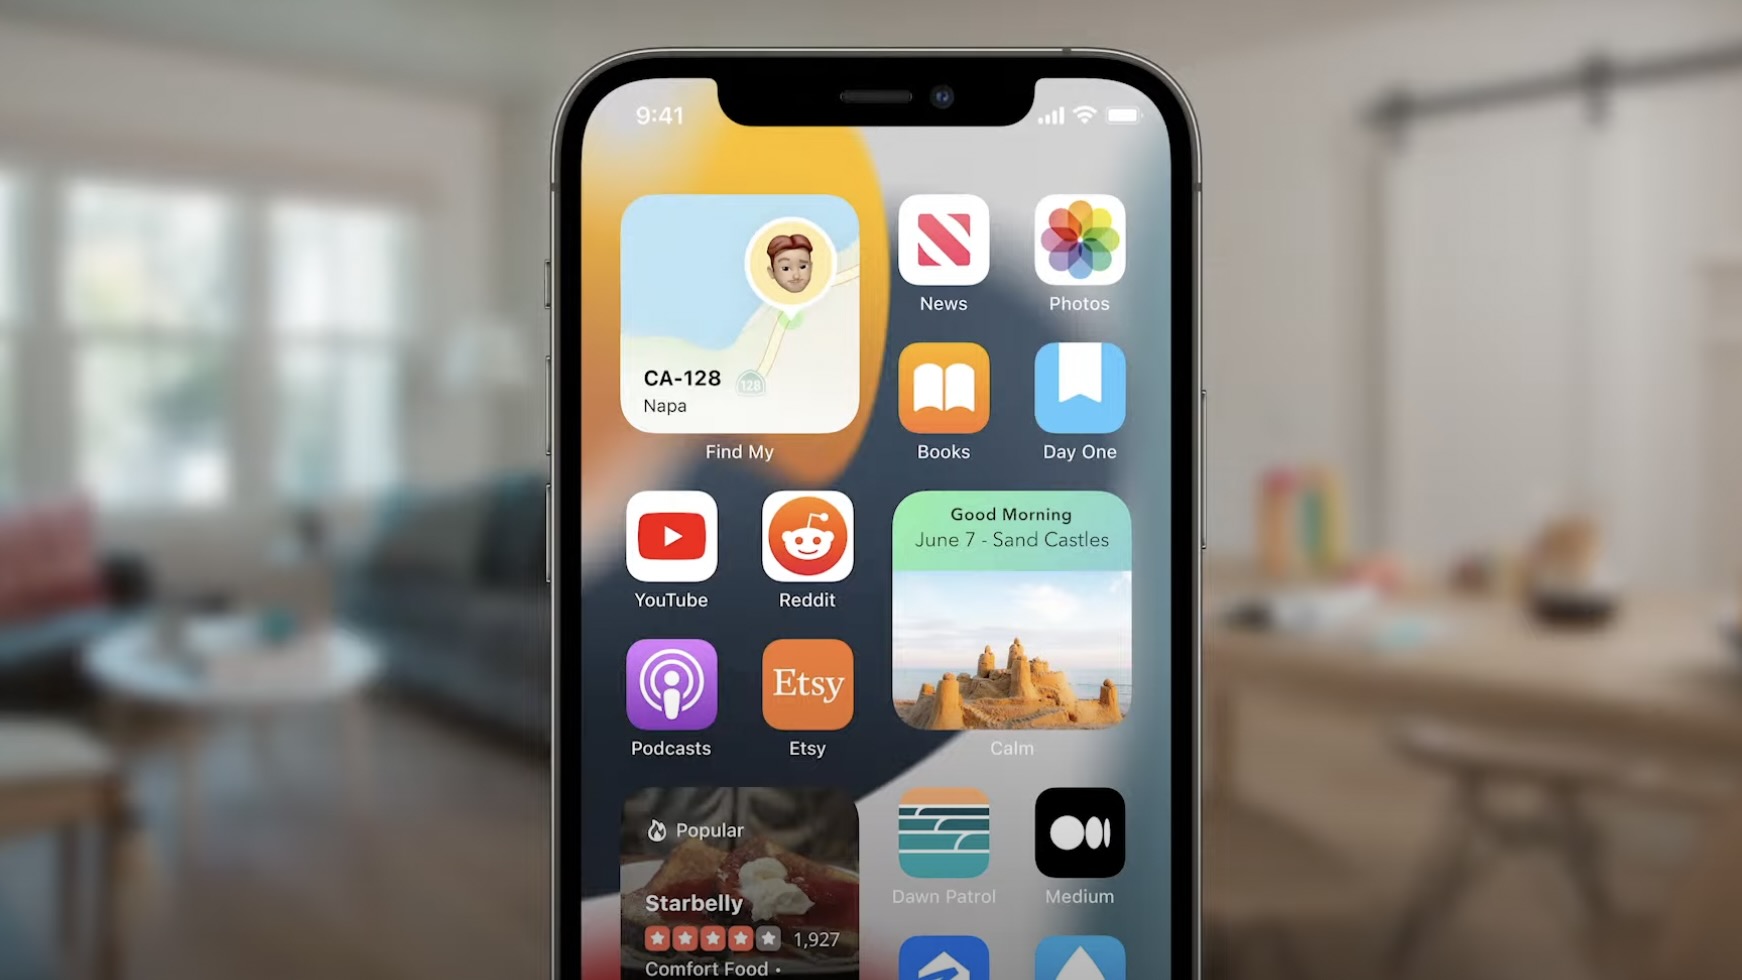 iOS 15 includes new Home Screen widgets for Find My, Contacts, Sleep